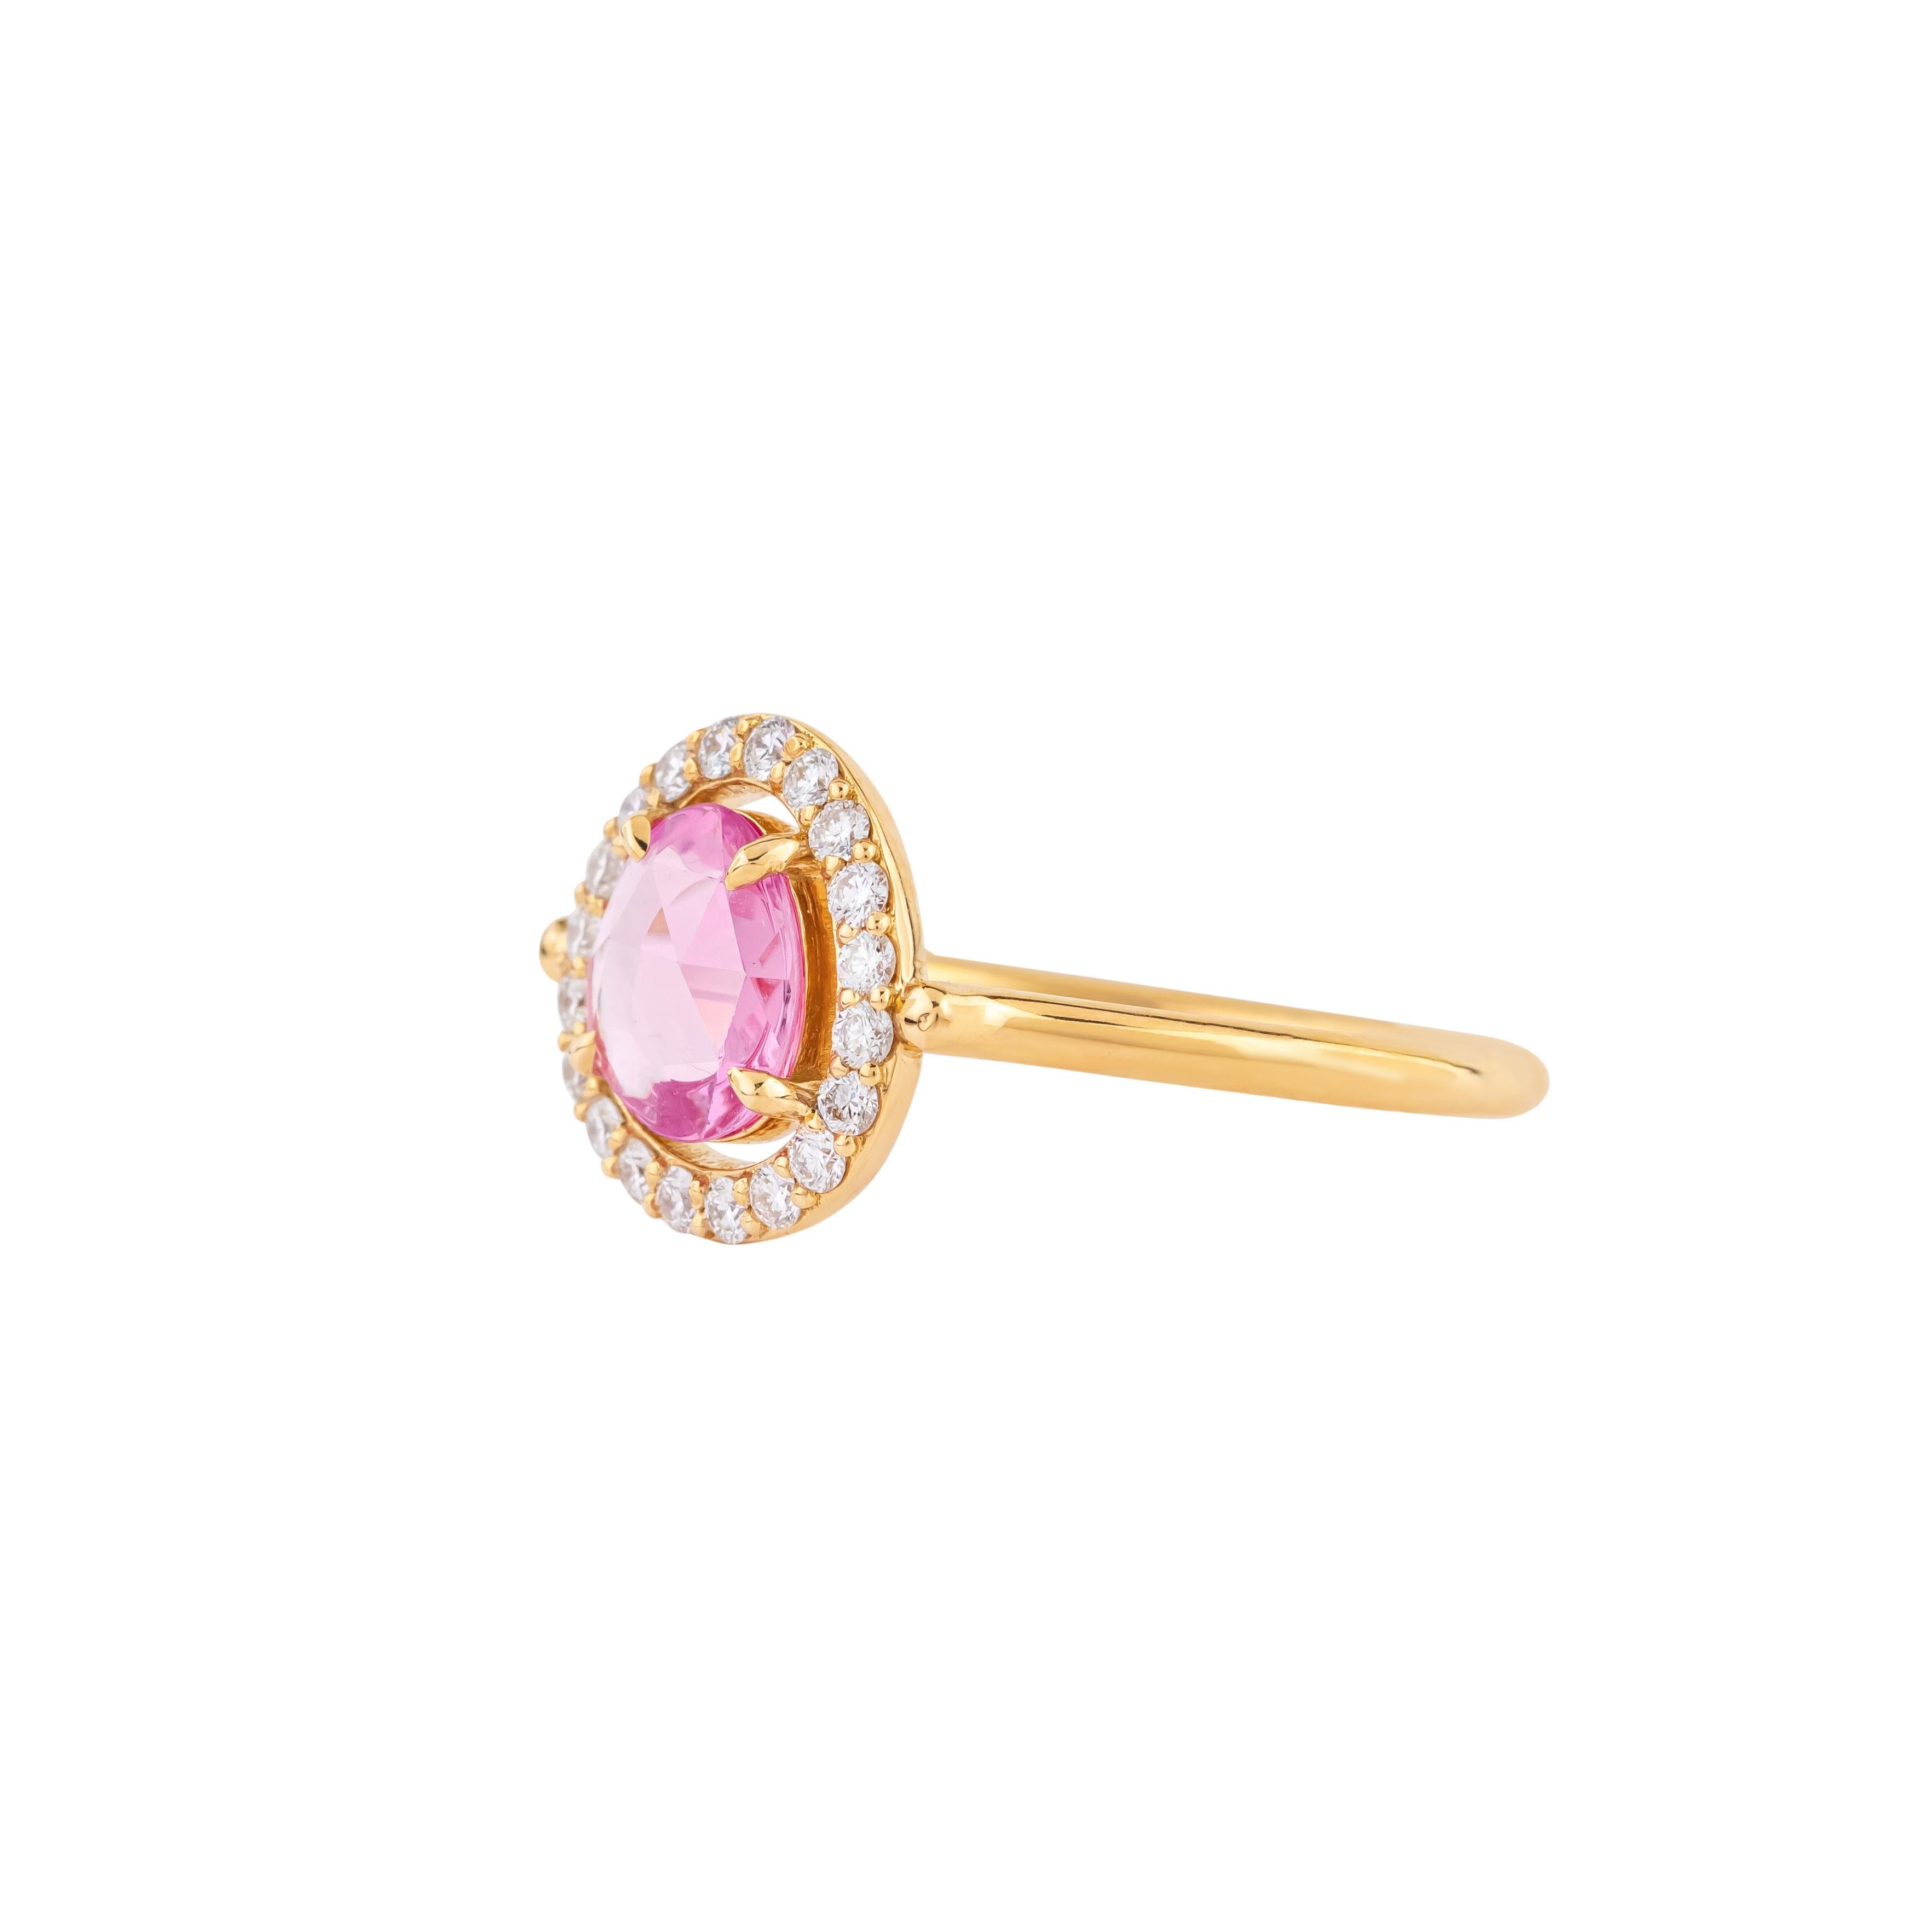 Modern 18 Karat Gold 0.95 Carat Diamond and Pink Sapphire Solitaire Ring For Sale